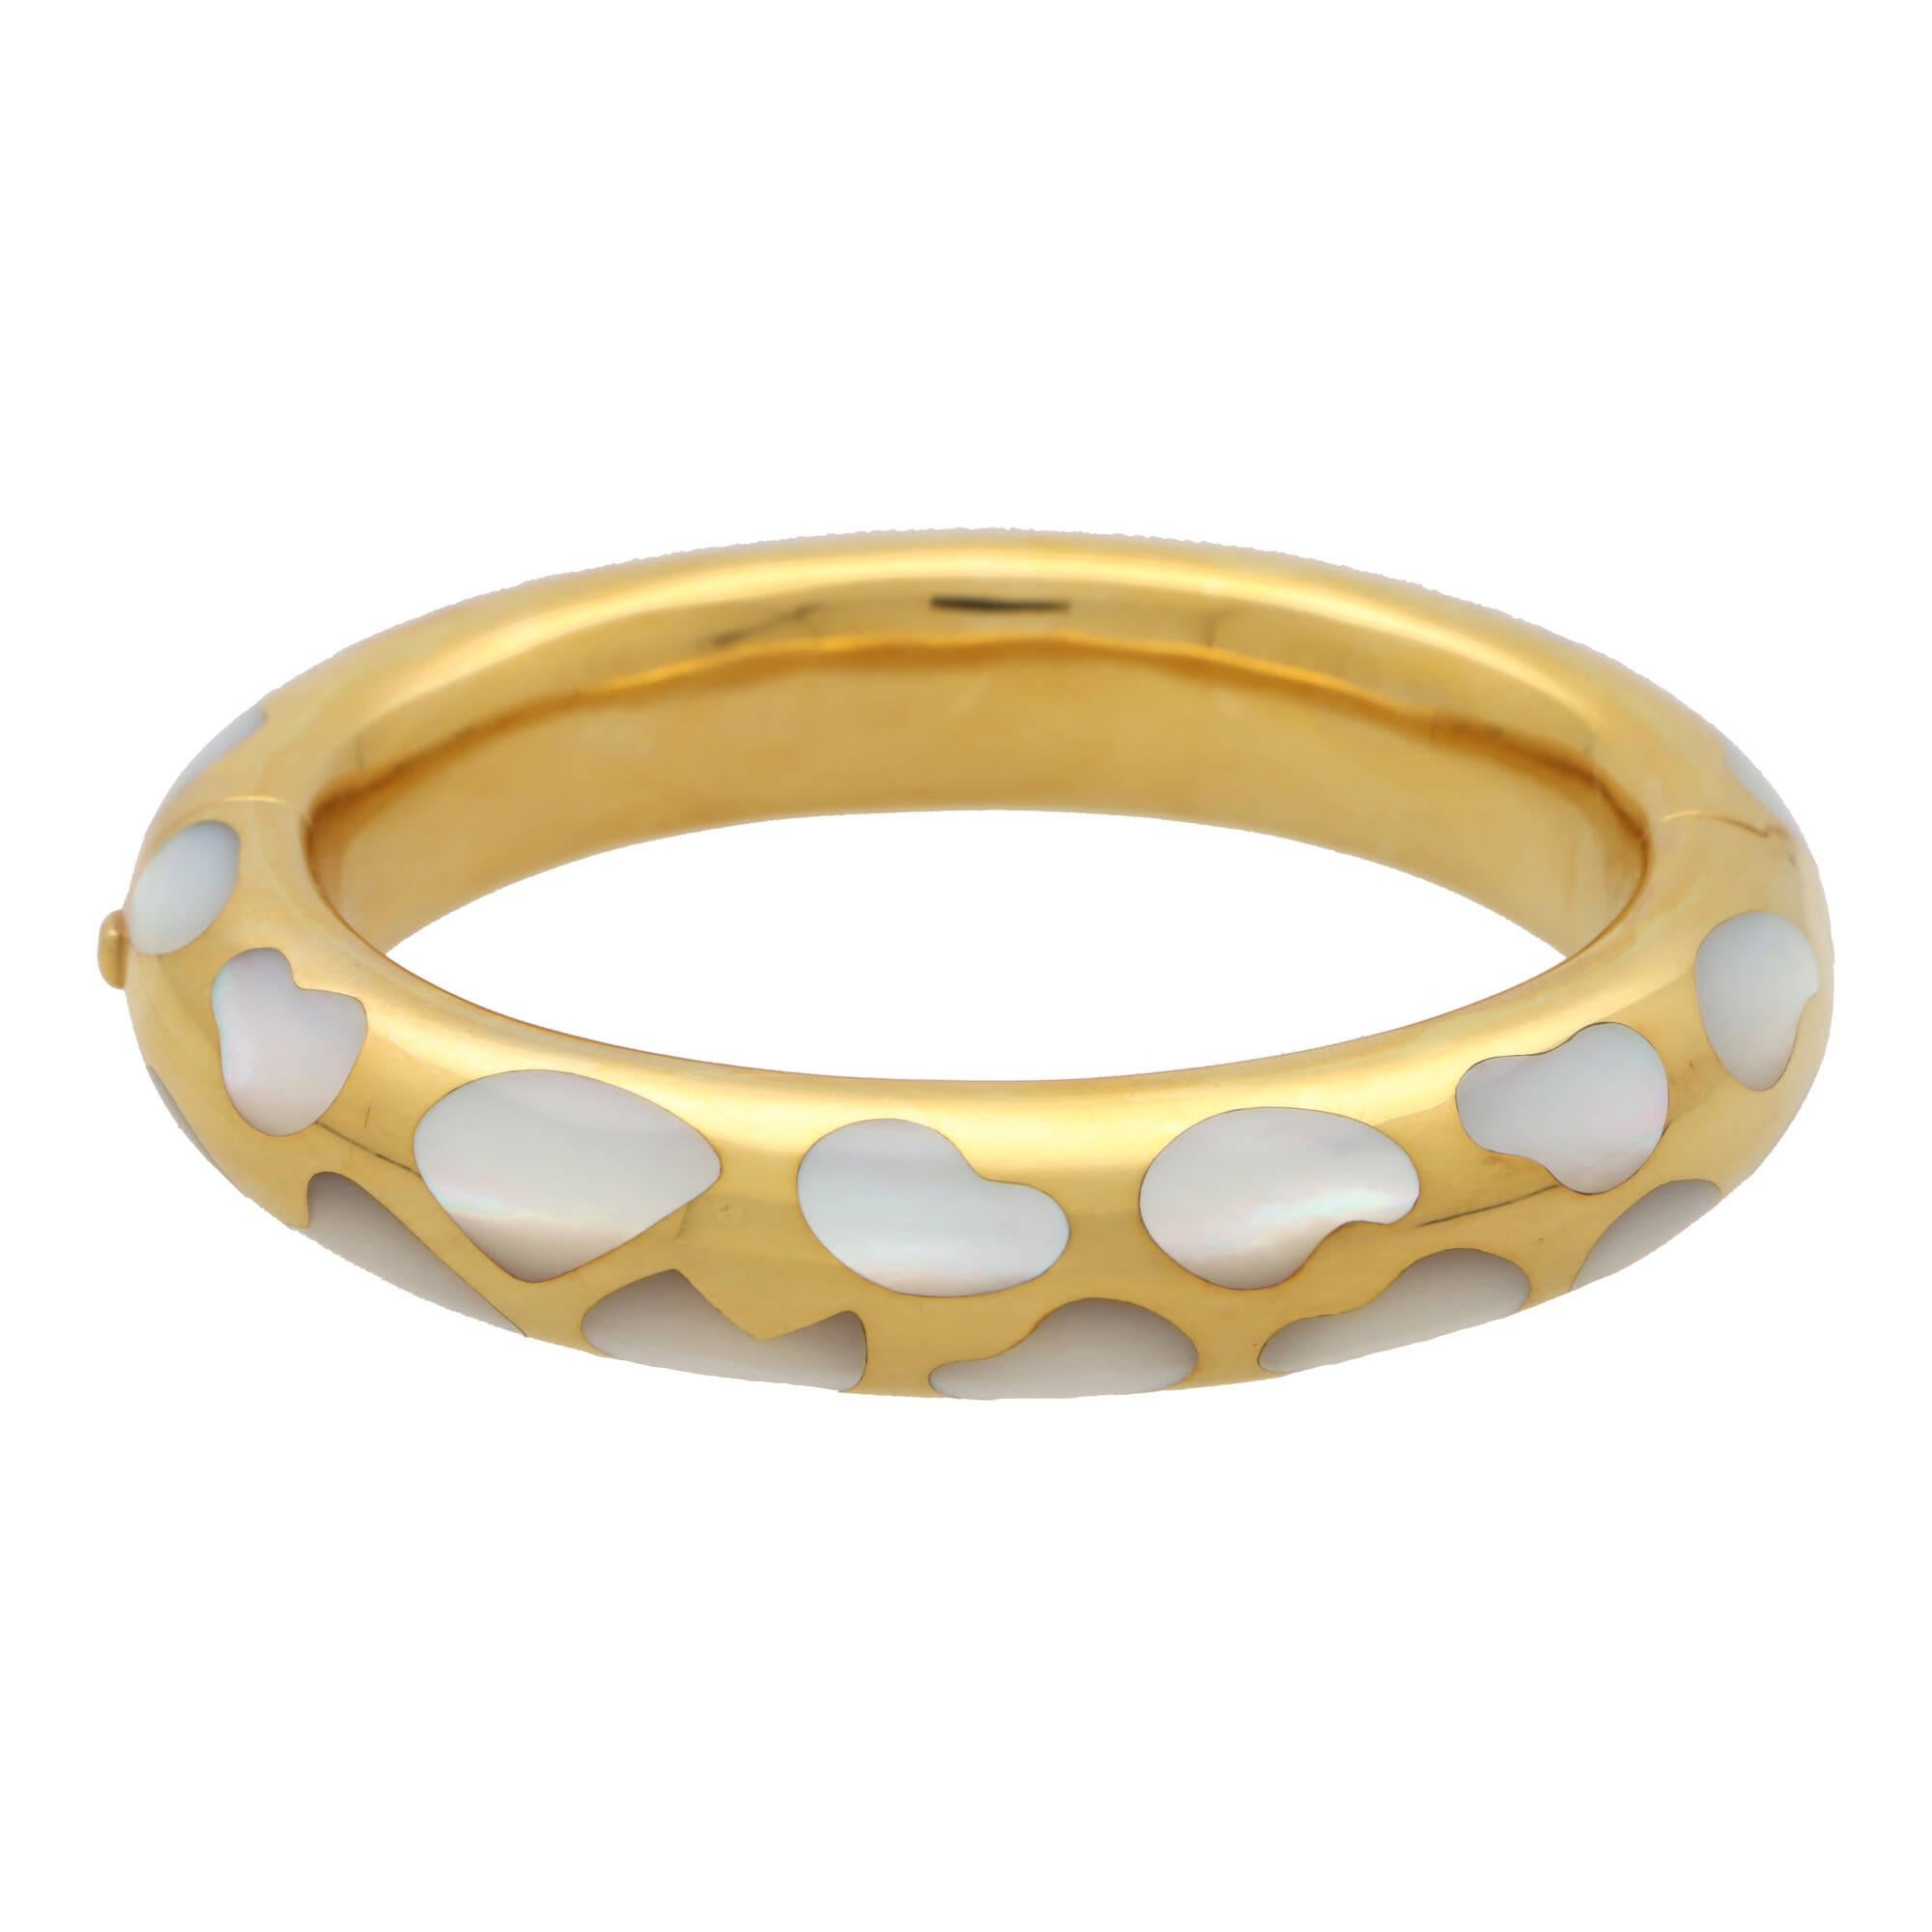 
A beautiful vintage Angela Cumings for Tiffany & Co. mother of pearl bangle, set in 18k yellow gold.

From the now discontinued ‘Allure collection’ by Angela Cummings for Tiffany & Co., the bangle is composed of a chunky yellow gold band. The